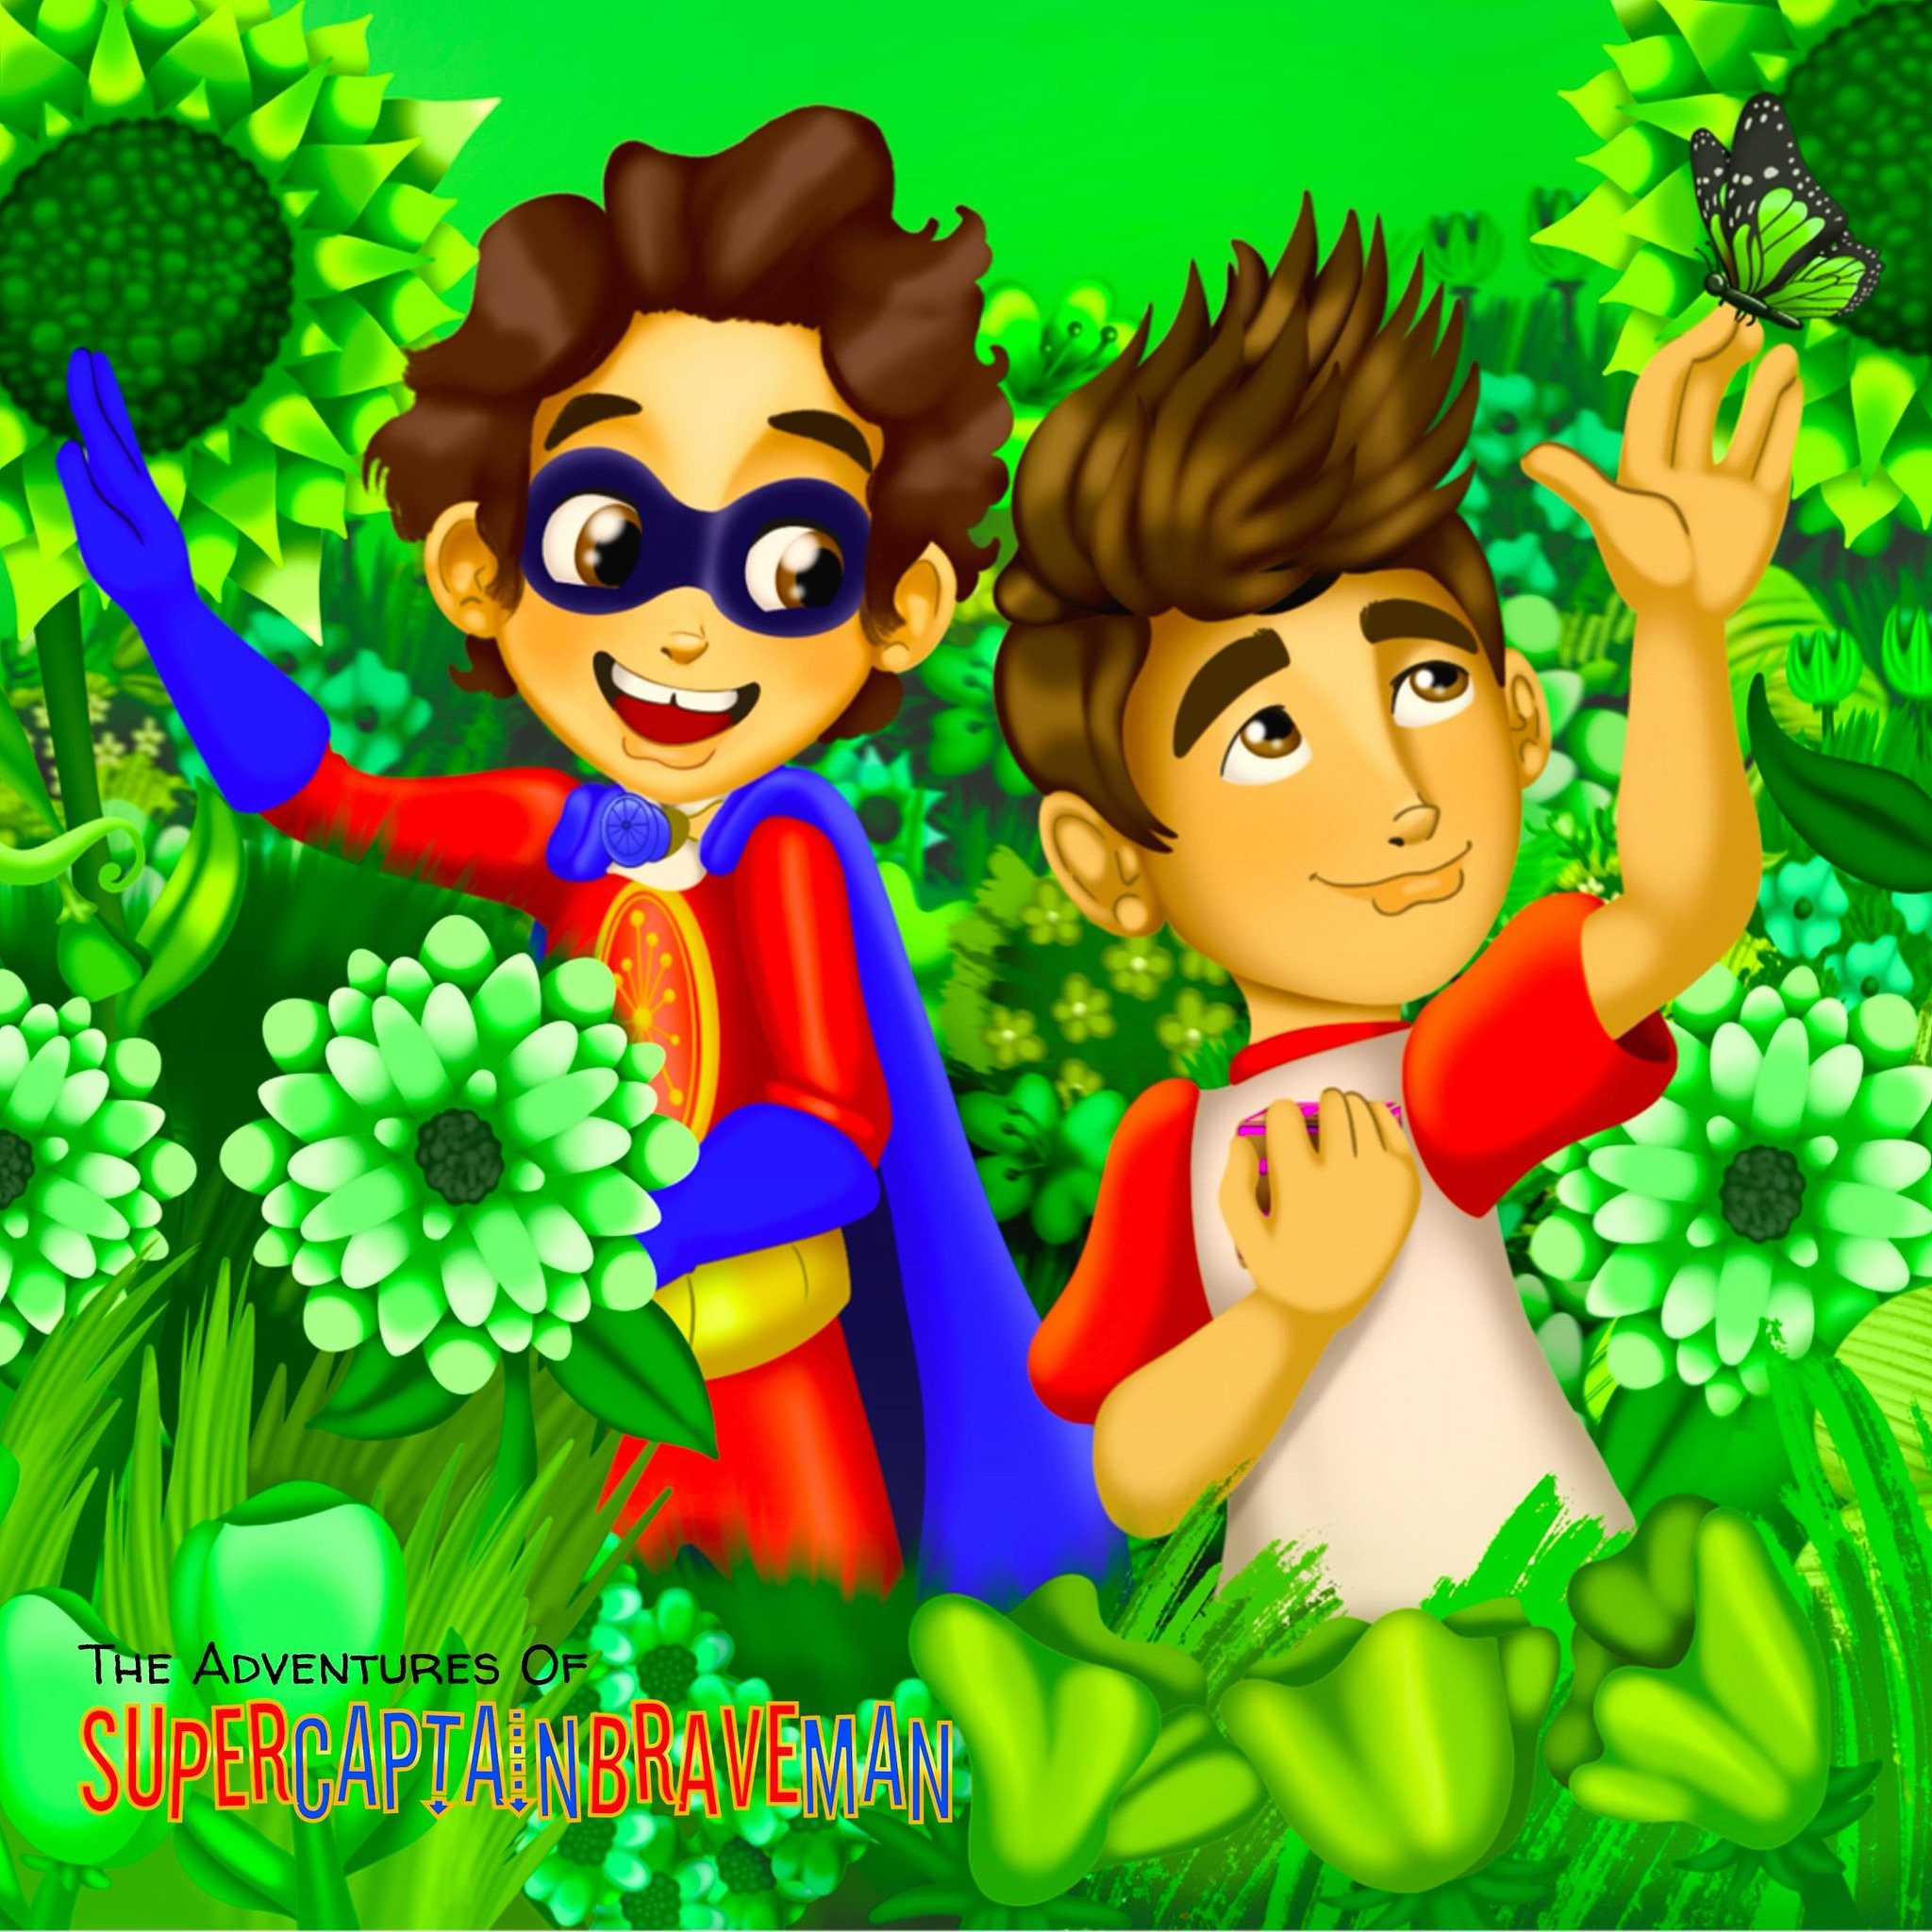 Sometimes the greatest adventures are found in the simple moments! 🌻

The Adventures of SuperCaptainBraveMan Book 2: A Spectrum of Love follows SuperCaptainBraveMan and his friend Nicolas, a young boy with Autism. Together they go on an adventure ov